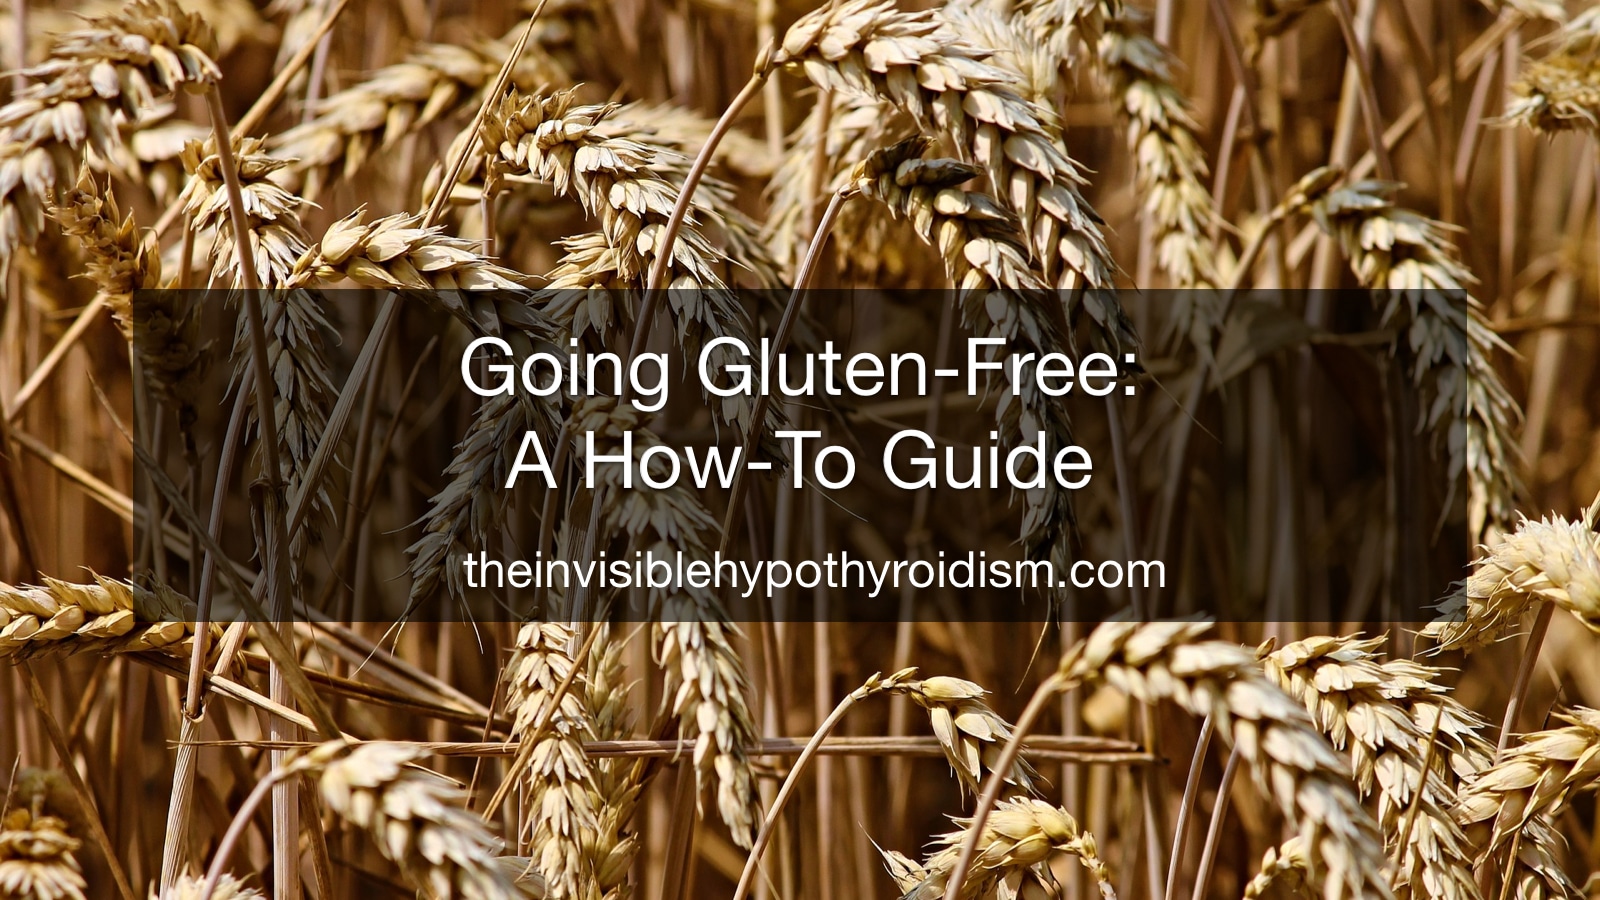 Going Gluten-Free: A How-To Guide